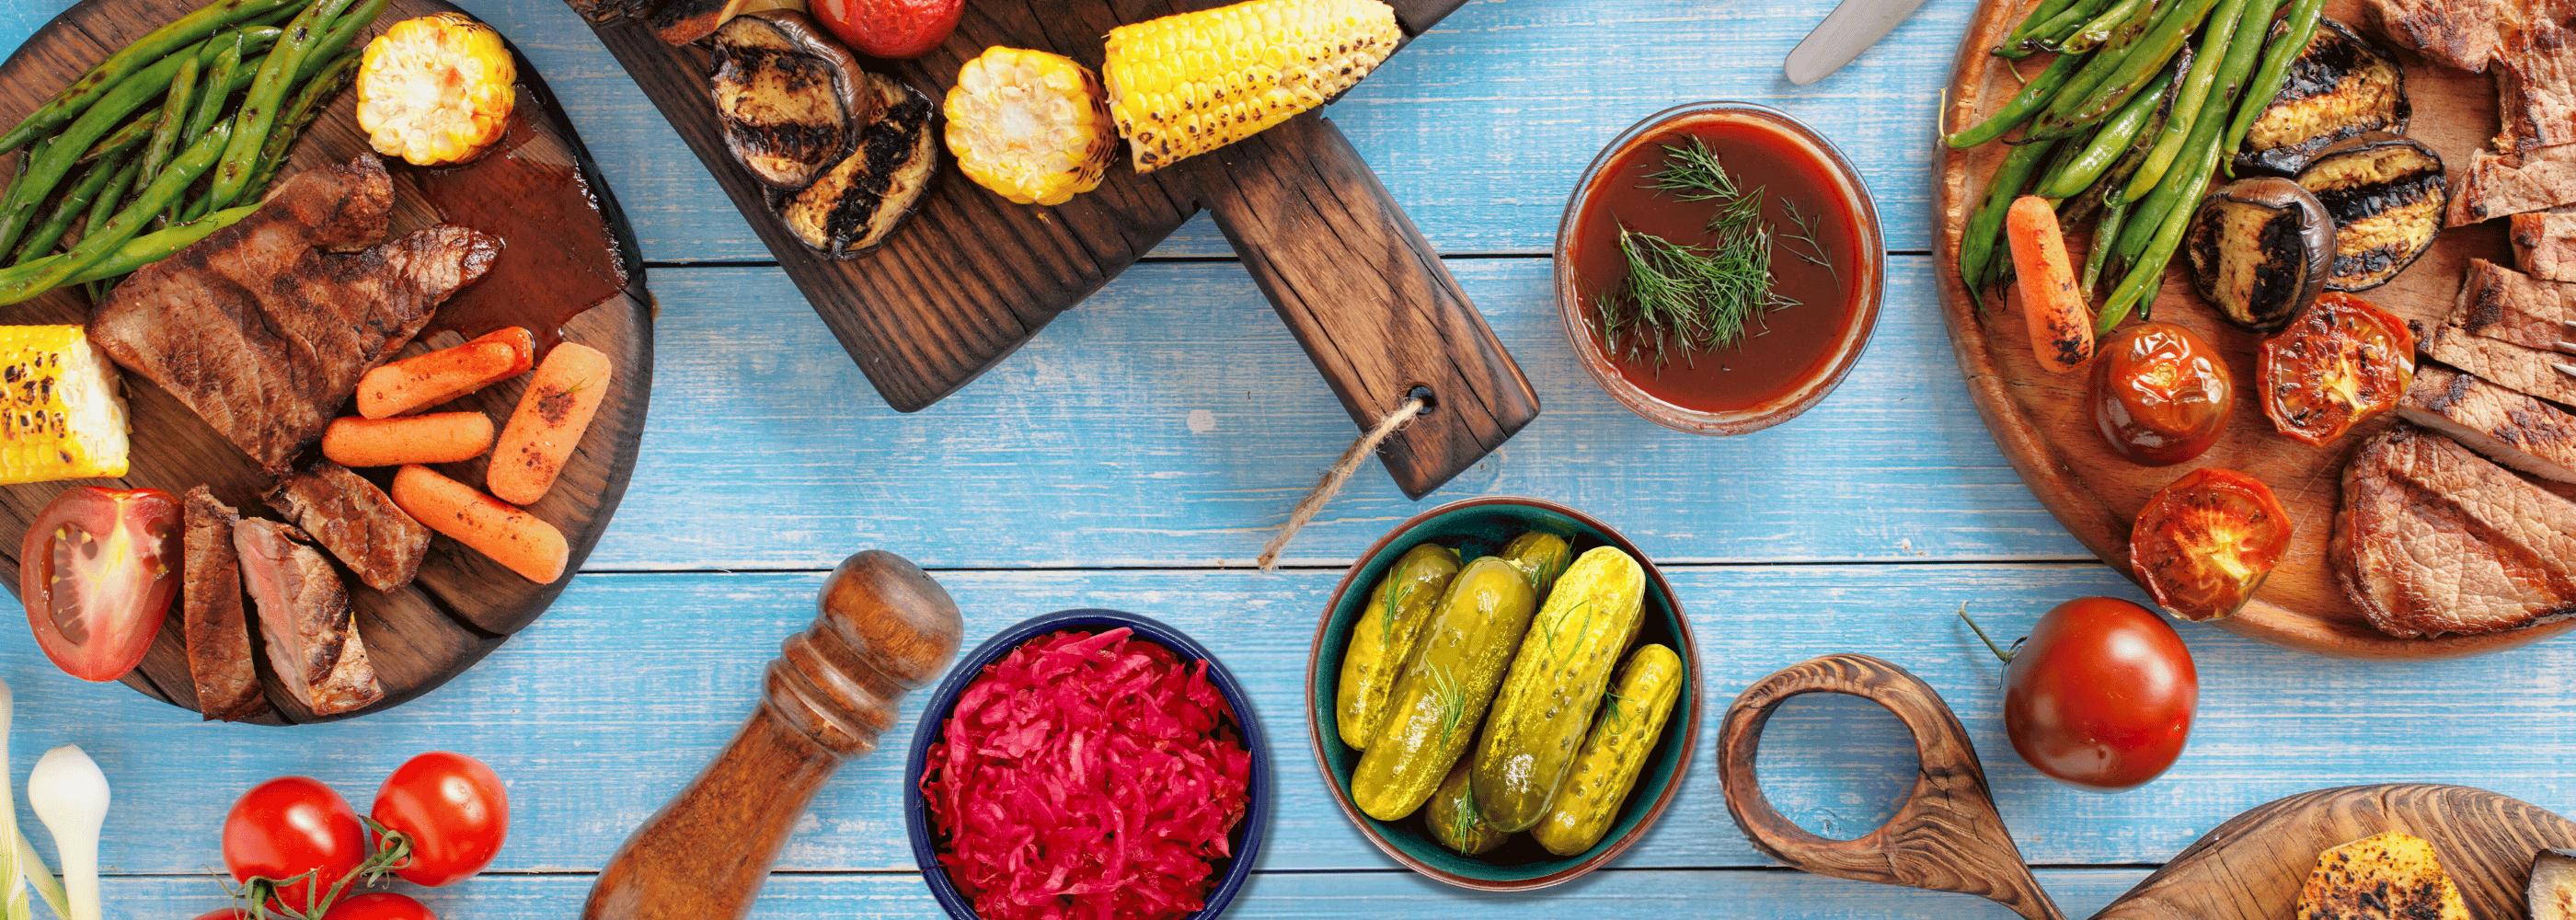 grilled foods with bowls of fermented sauerkraut and pickles on picnic table